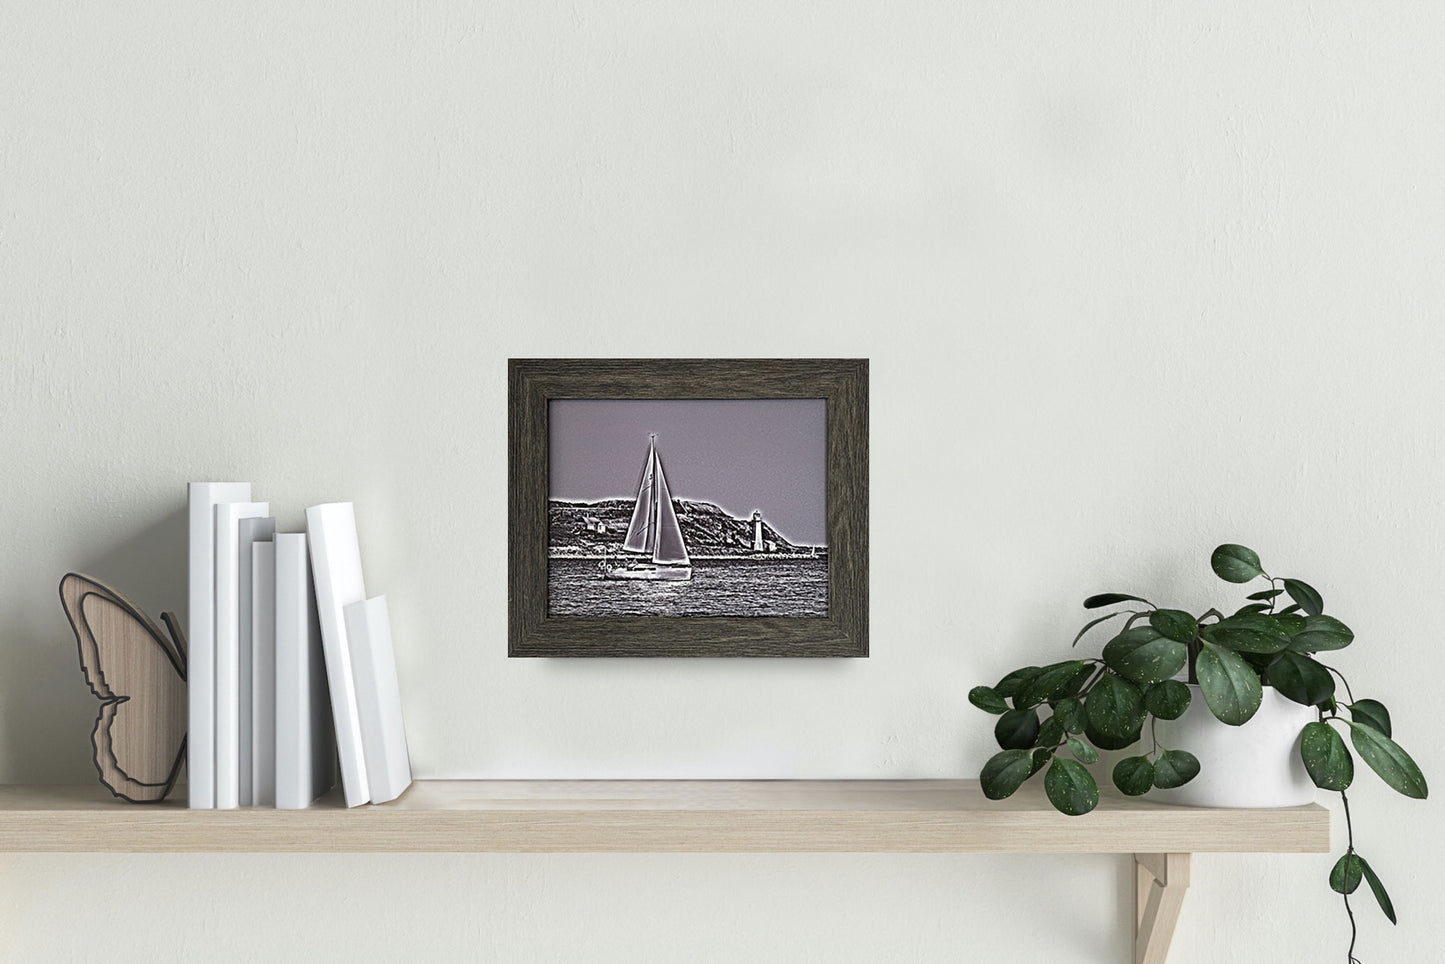 Monochrome photography of Georges Island, Halifax.  High quality photography 7.5 x 9.5 inches covered with resin in a classic frame 10.25 x 12.25 inches.  Ready to hang in a room of your choice.